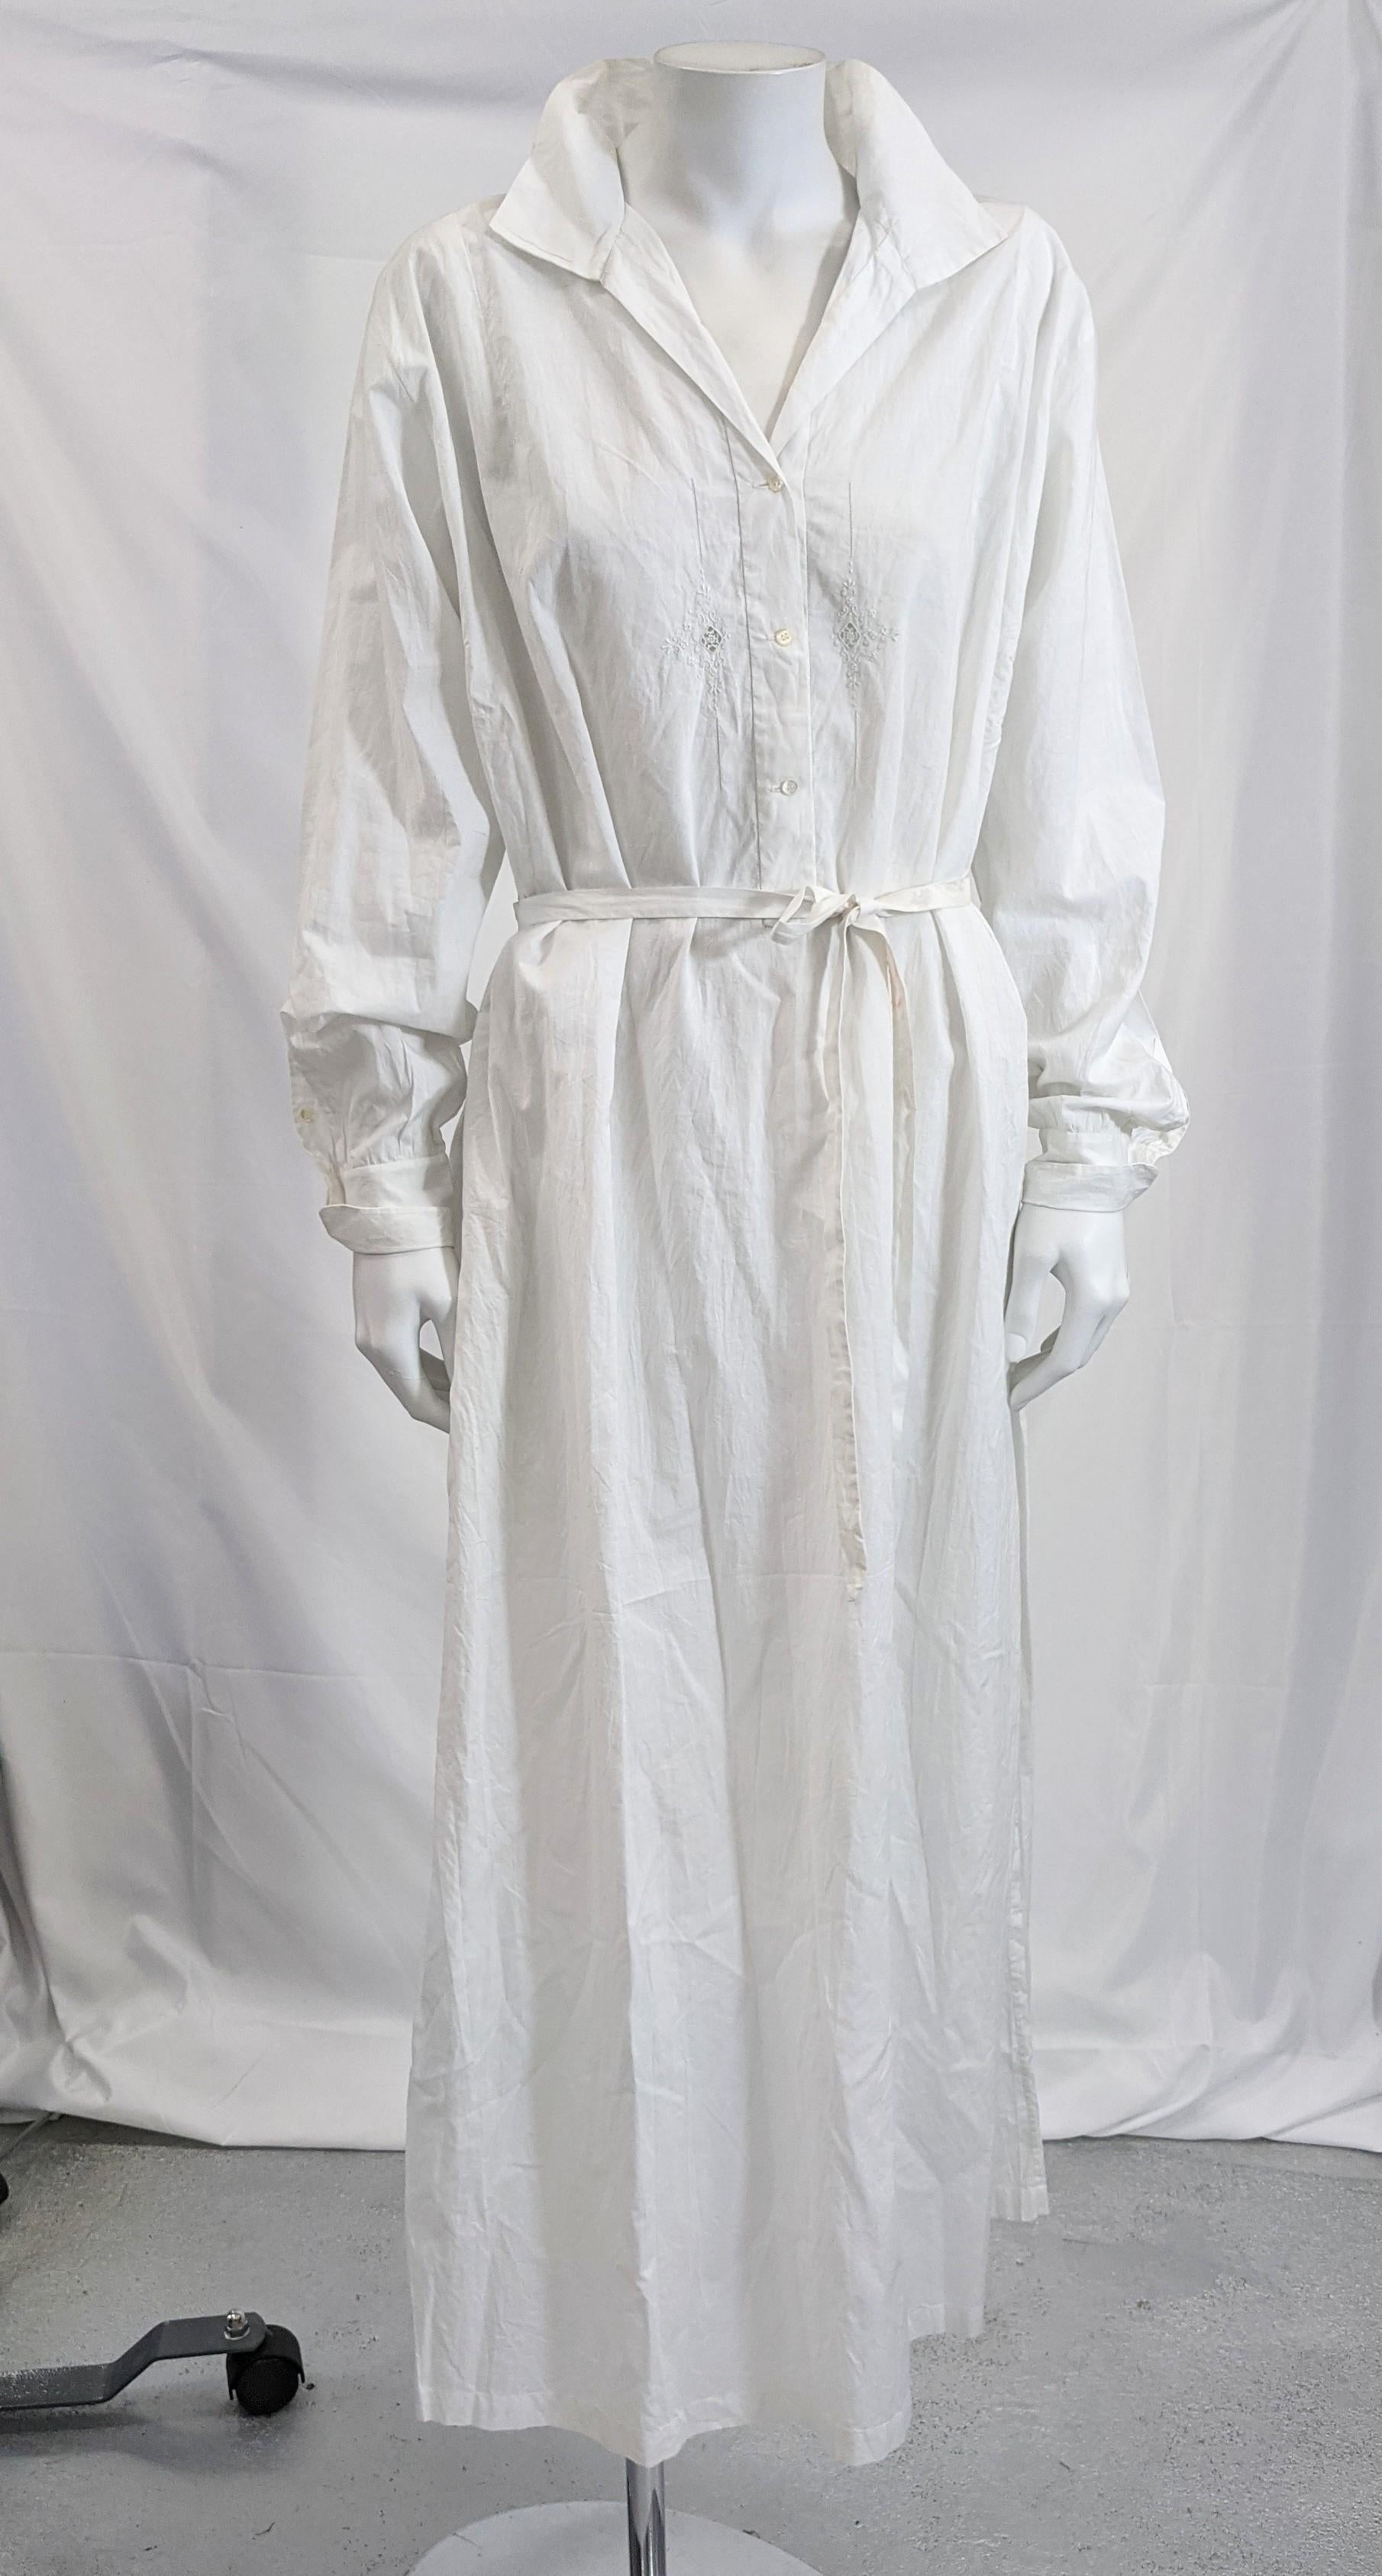 Elegant French Cotton Batiste Dress easily worn as a day dress. Semi sheer cotton batiste with lovely openwork patterns on each side of placket. Large inverted pleats at each side seam waist release fullness. Self fabric belt with no pockets and